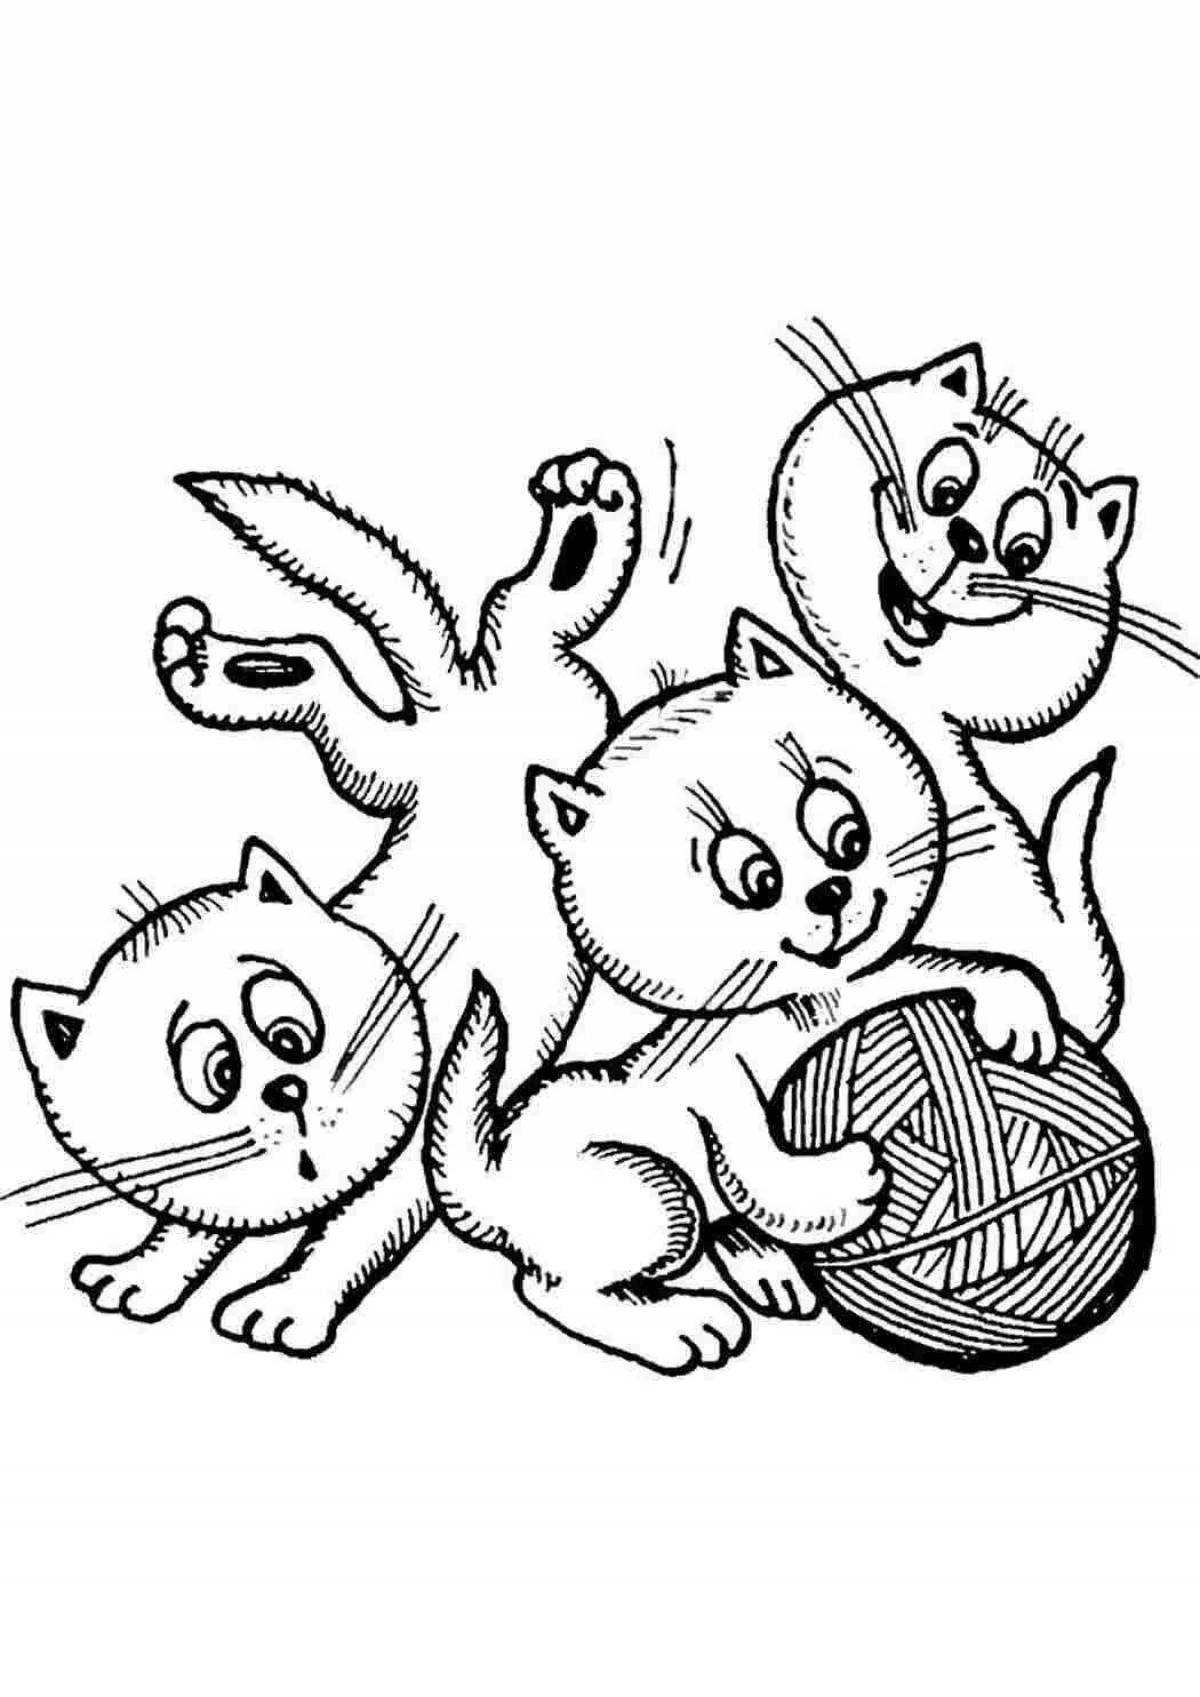 Coloring page excited kitten with a ball